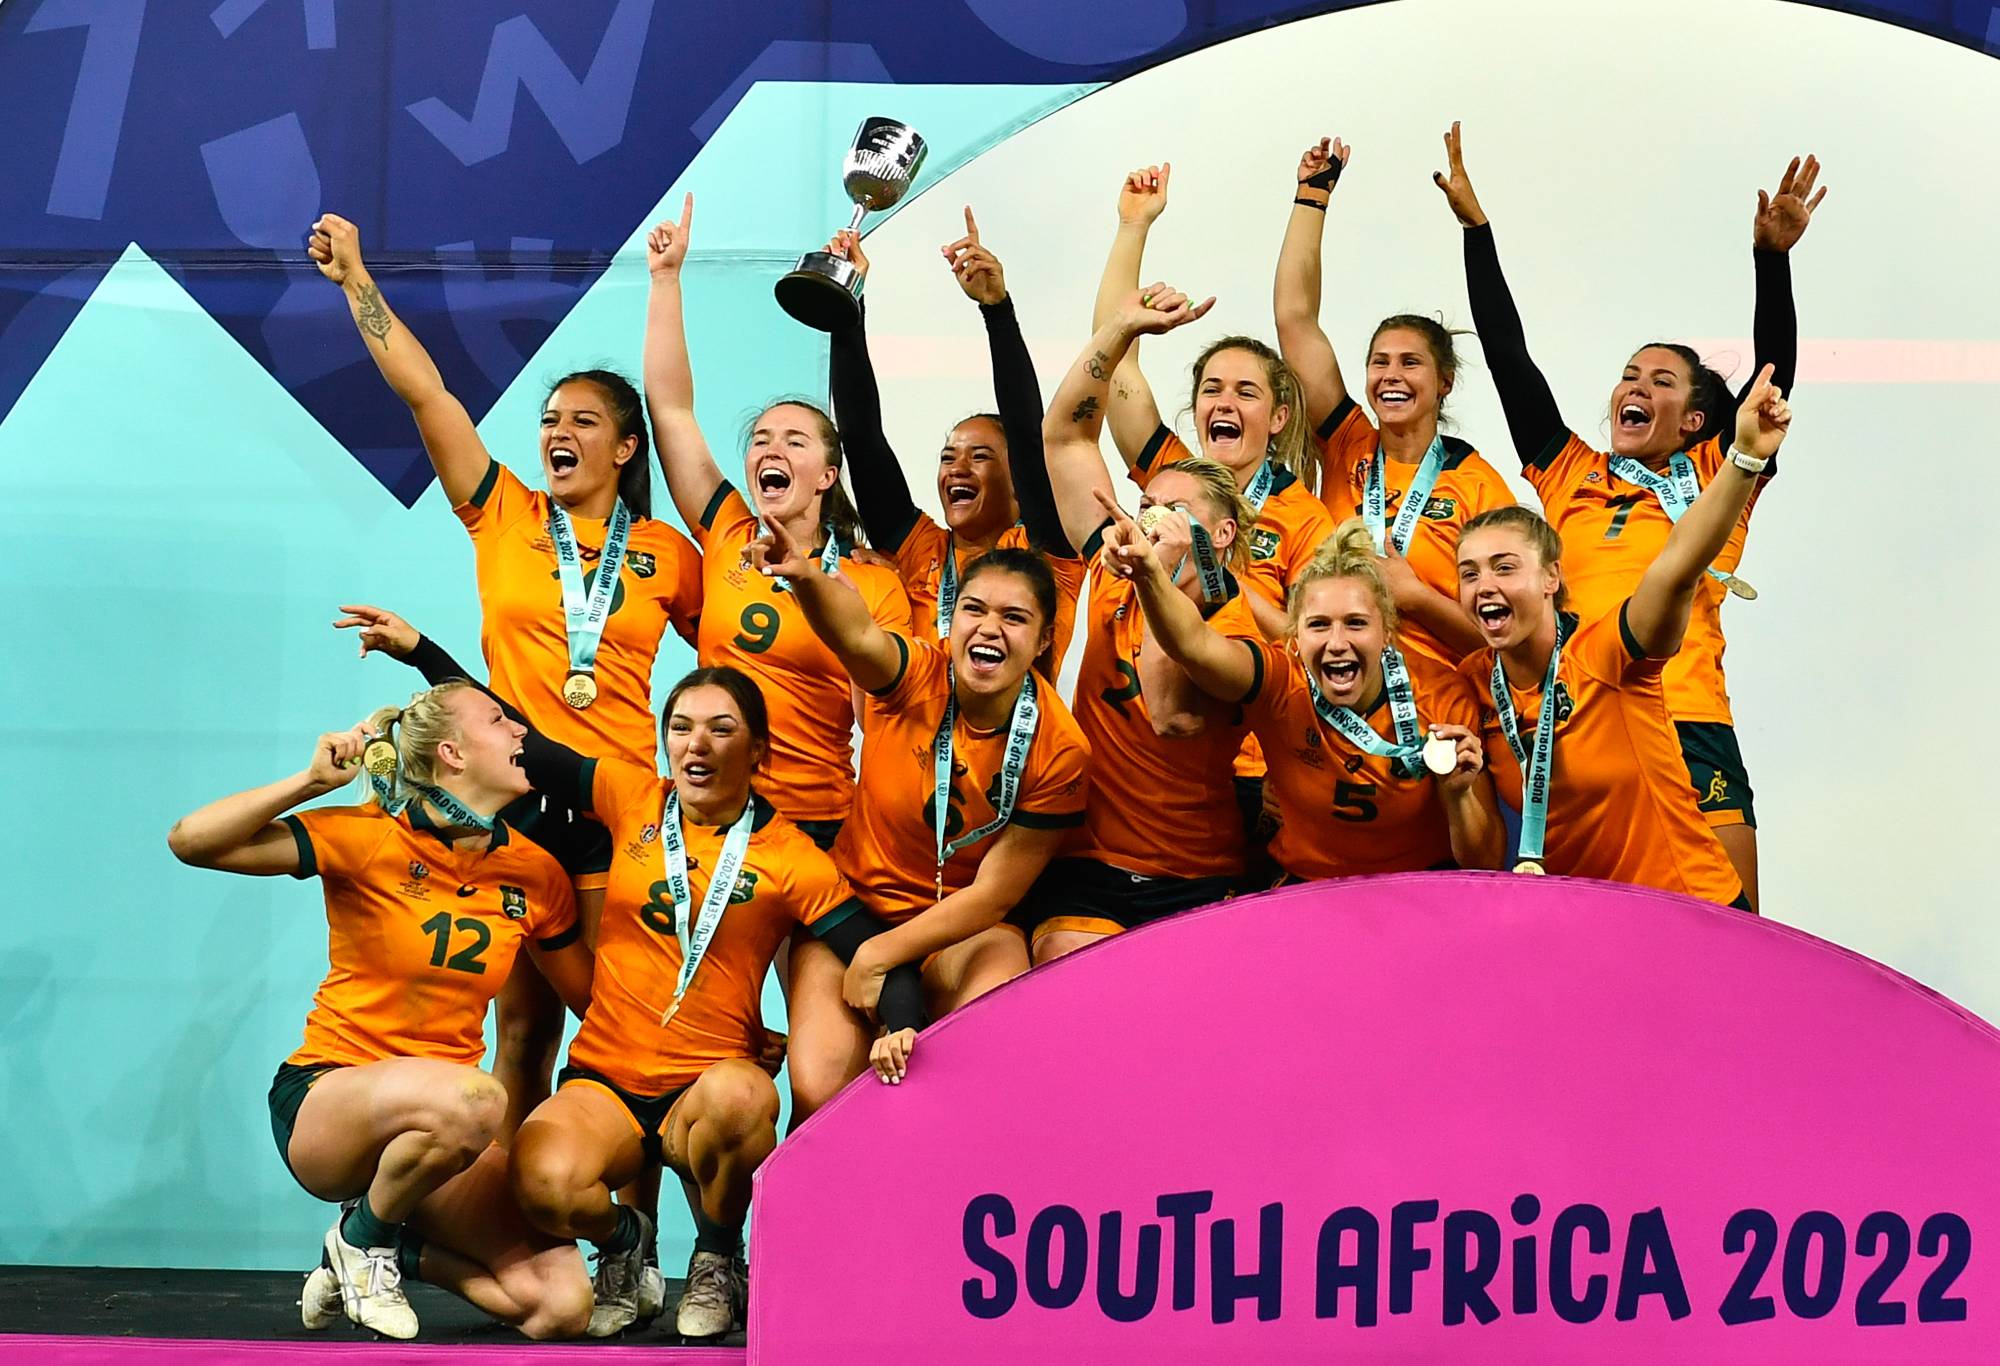 RWC Sevens winners, Australia women celebrate on the podium during day 3 of the Rugby World Cup Sevens 2022 Match 52 Championship Final between New Zealand and Fiji at DHL Stadium on September 11, 2022 in Cape Town, South Africa. (Photo by Ashley Vlotman/Gallo Images/Getty Images)